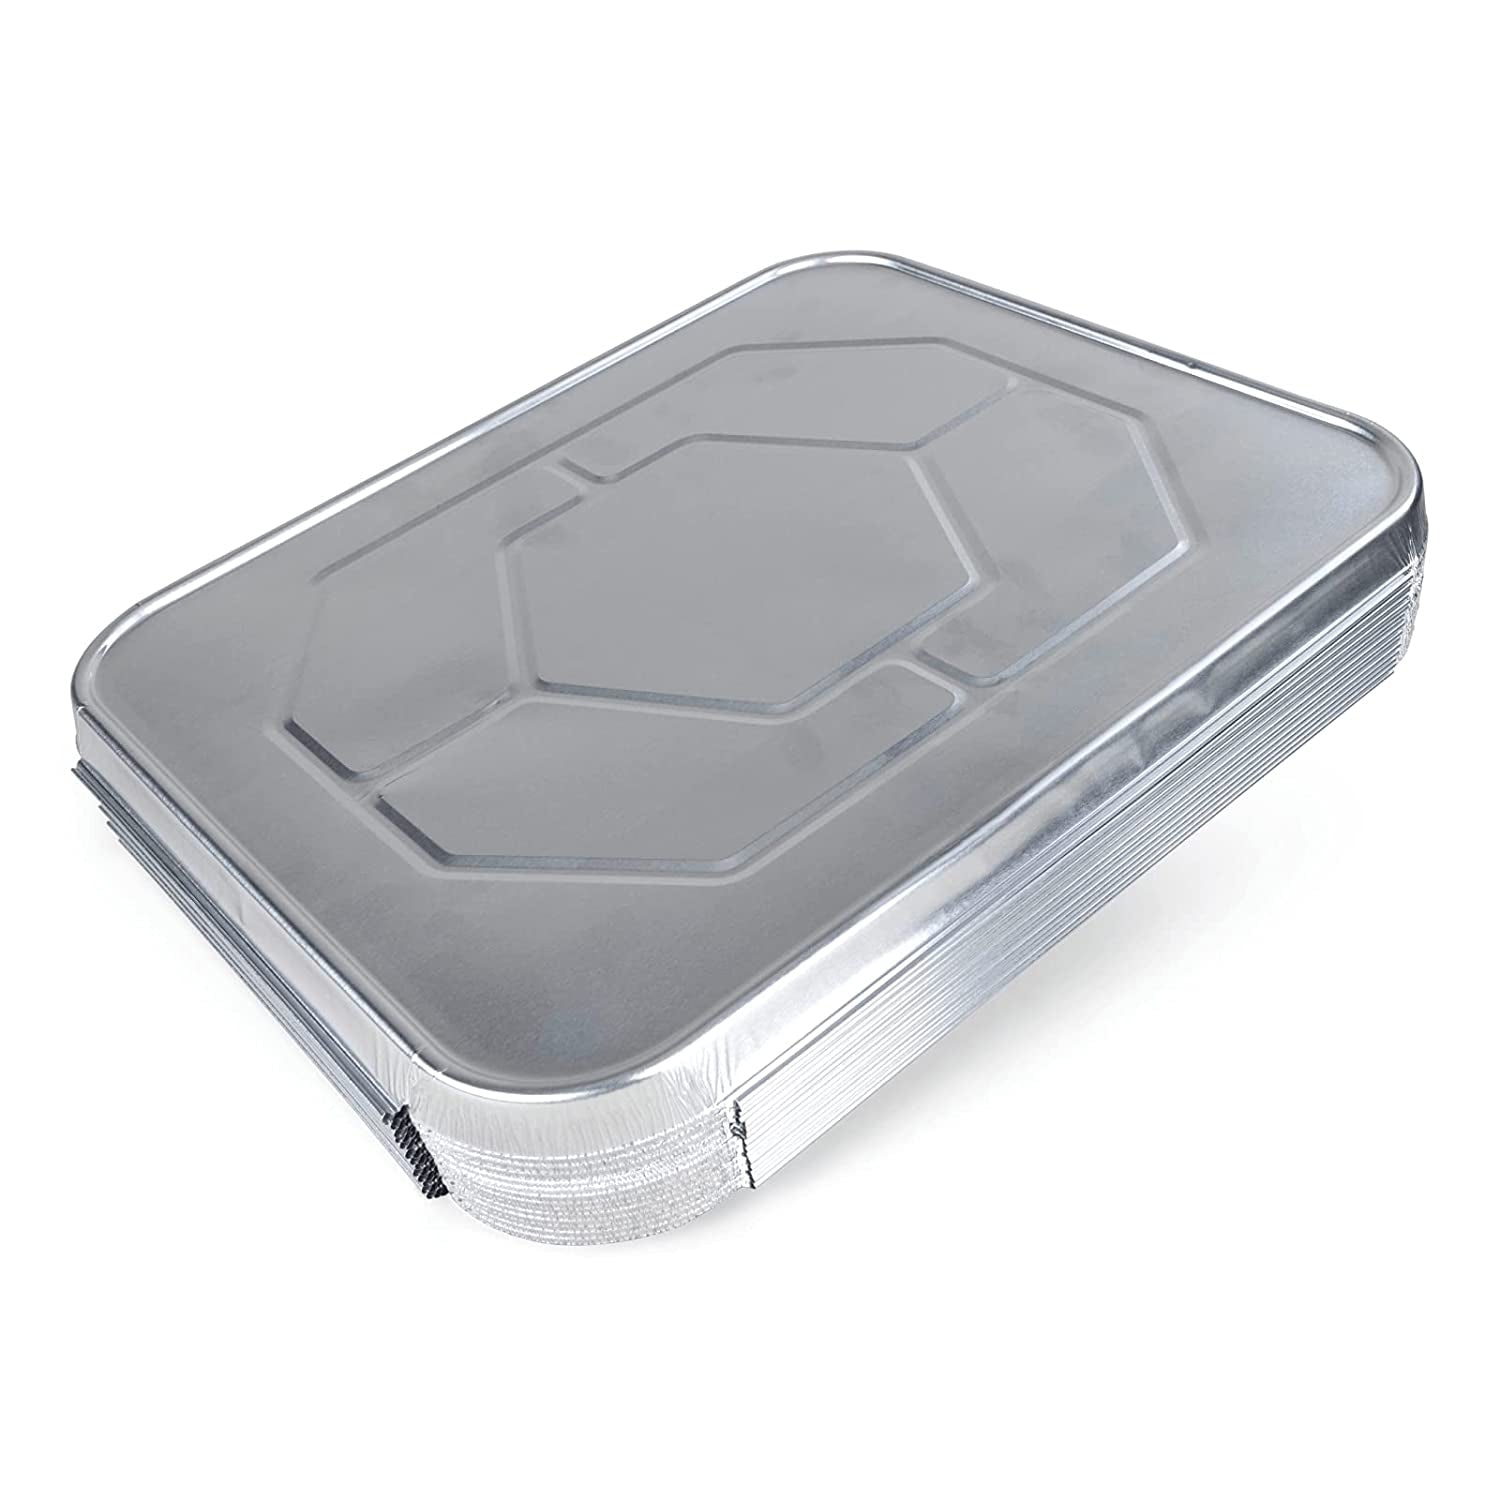 Nicole Fantini Collection Disposable Aluminum Dinner Tray with